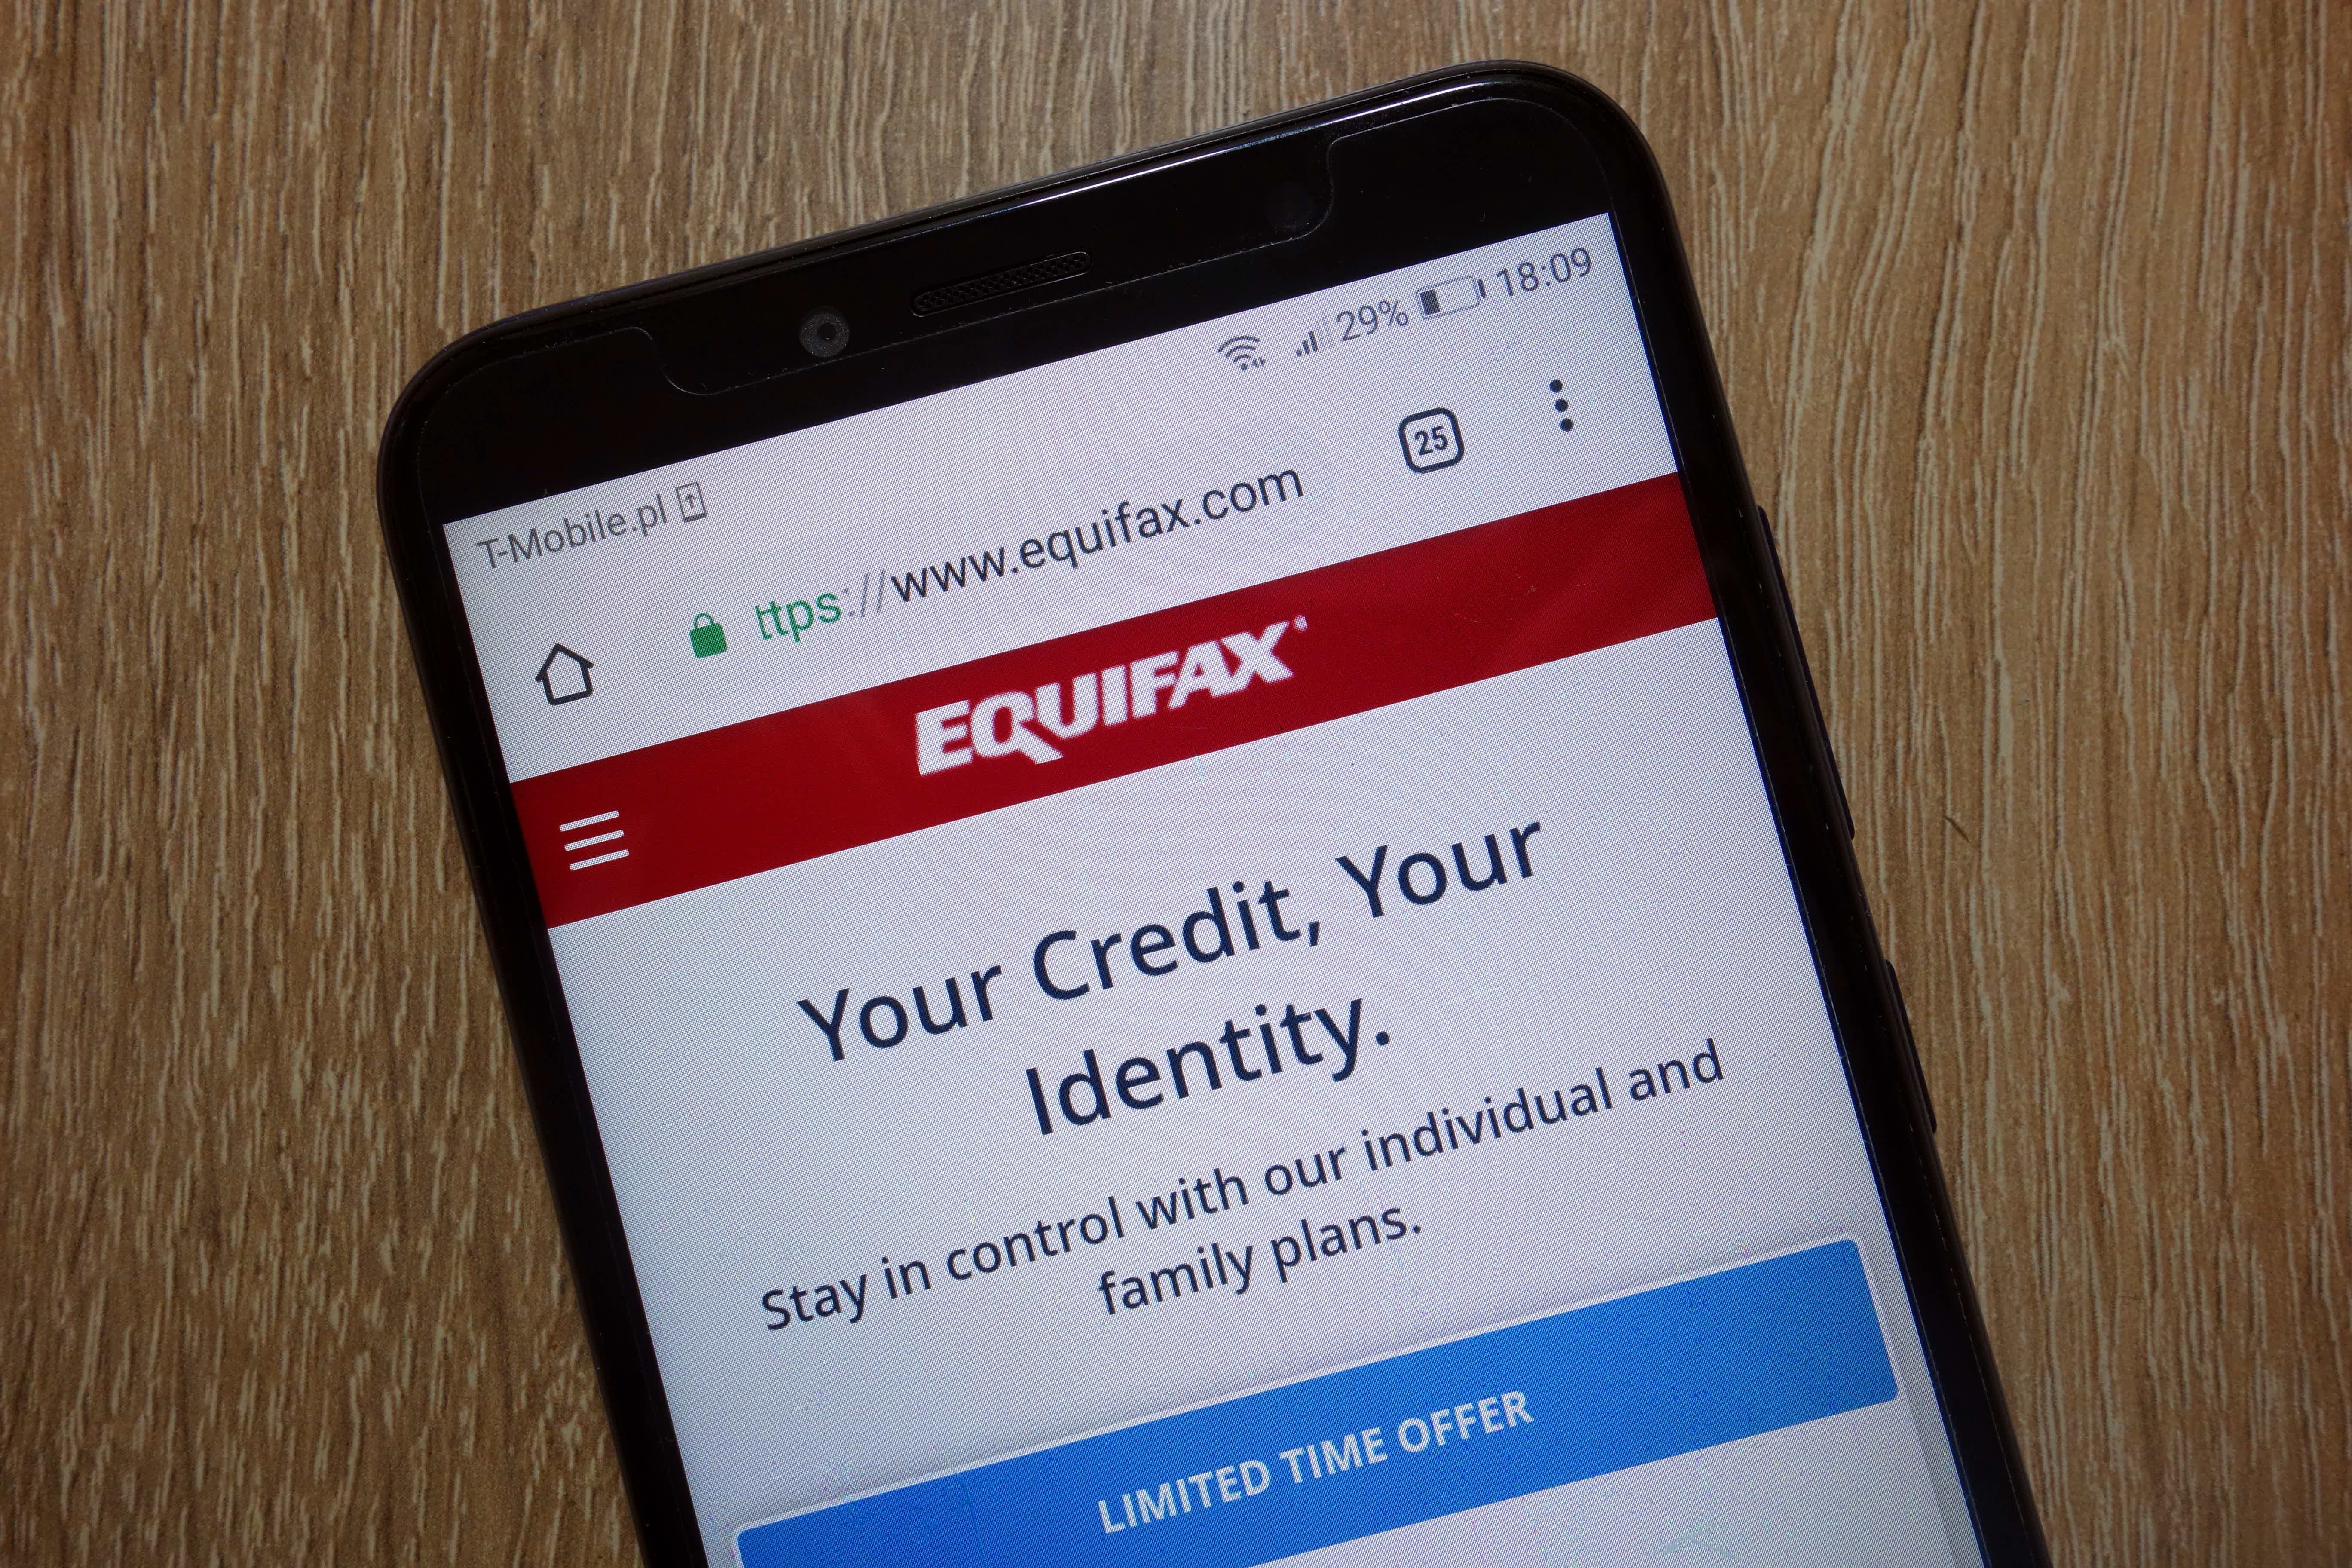 There are many different plans for you to choose from at Equifax. Source: Adobe Stock.